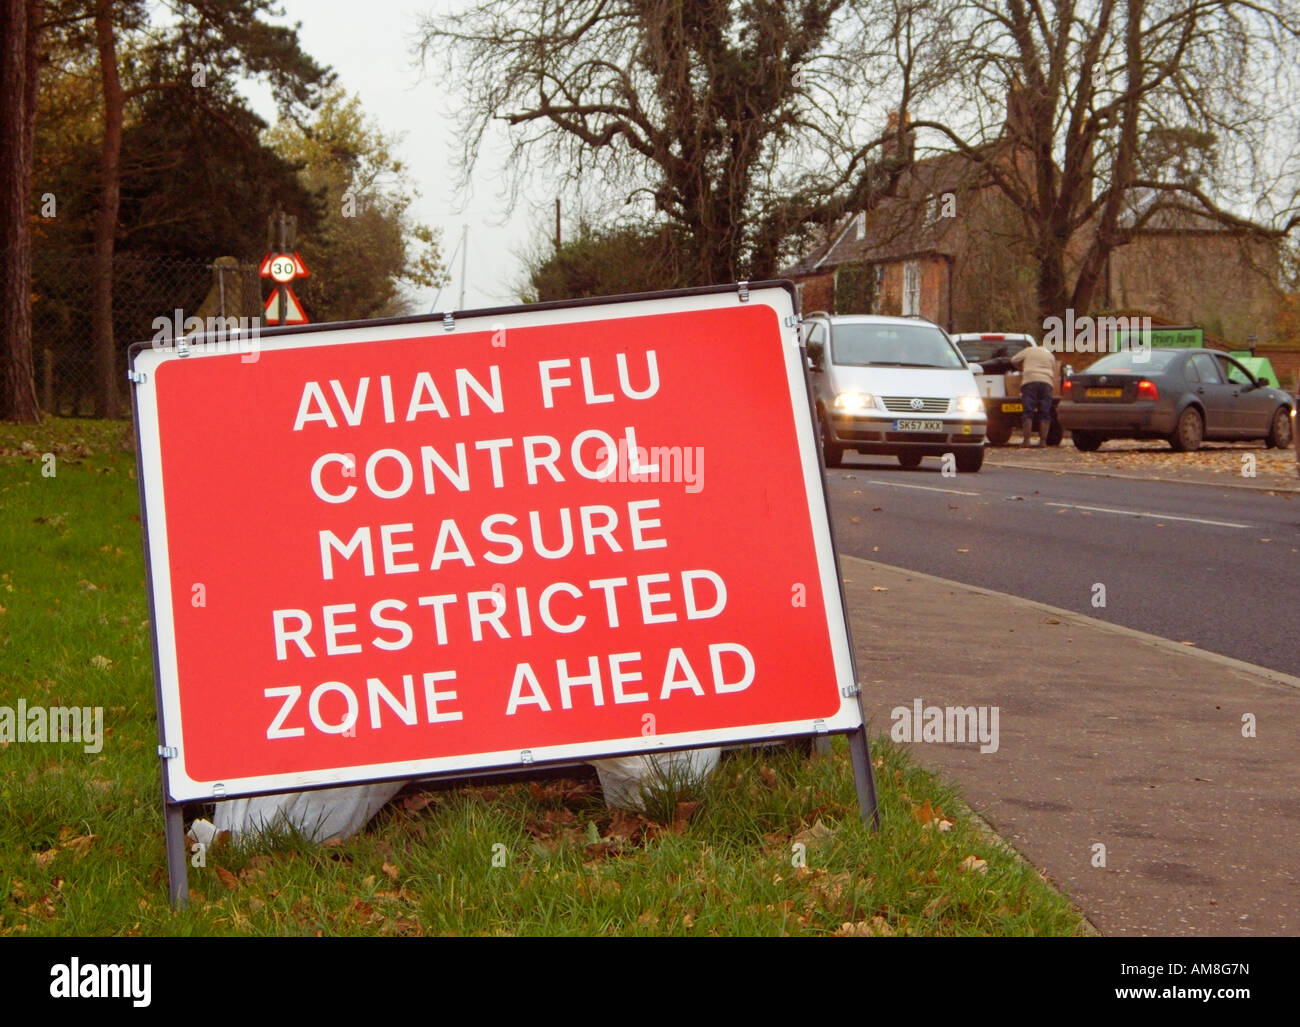 Avian Flu Control Measure Restricted Zone Ends sign. Known also as Avian influenza or Bird flu Stock Photo